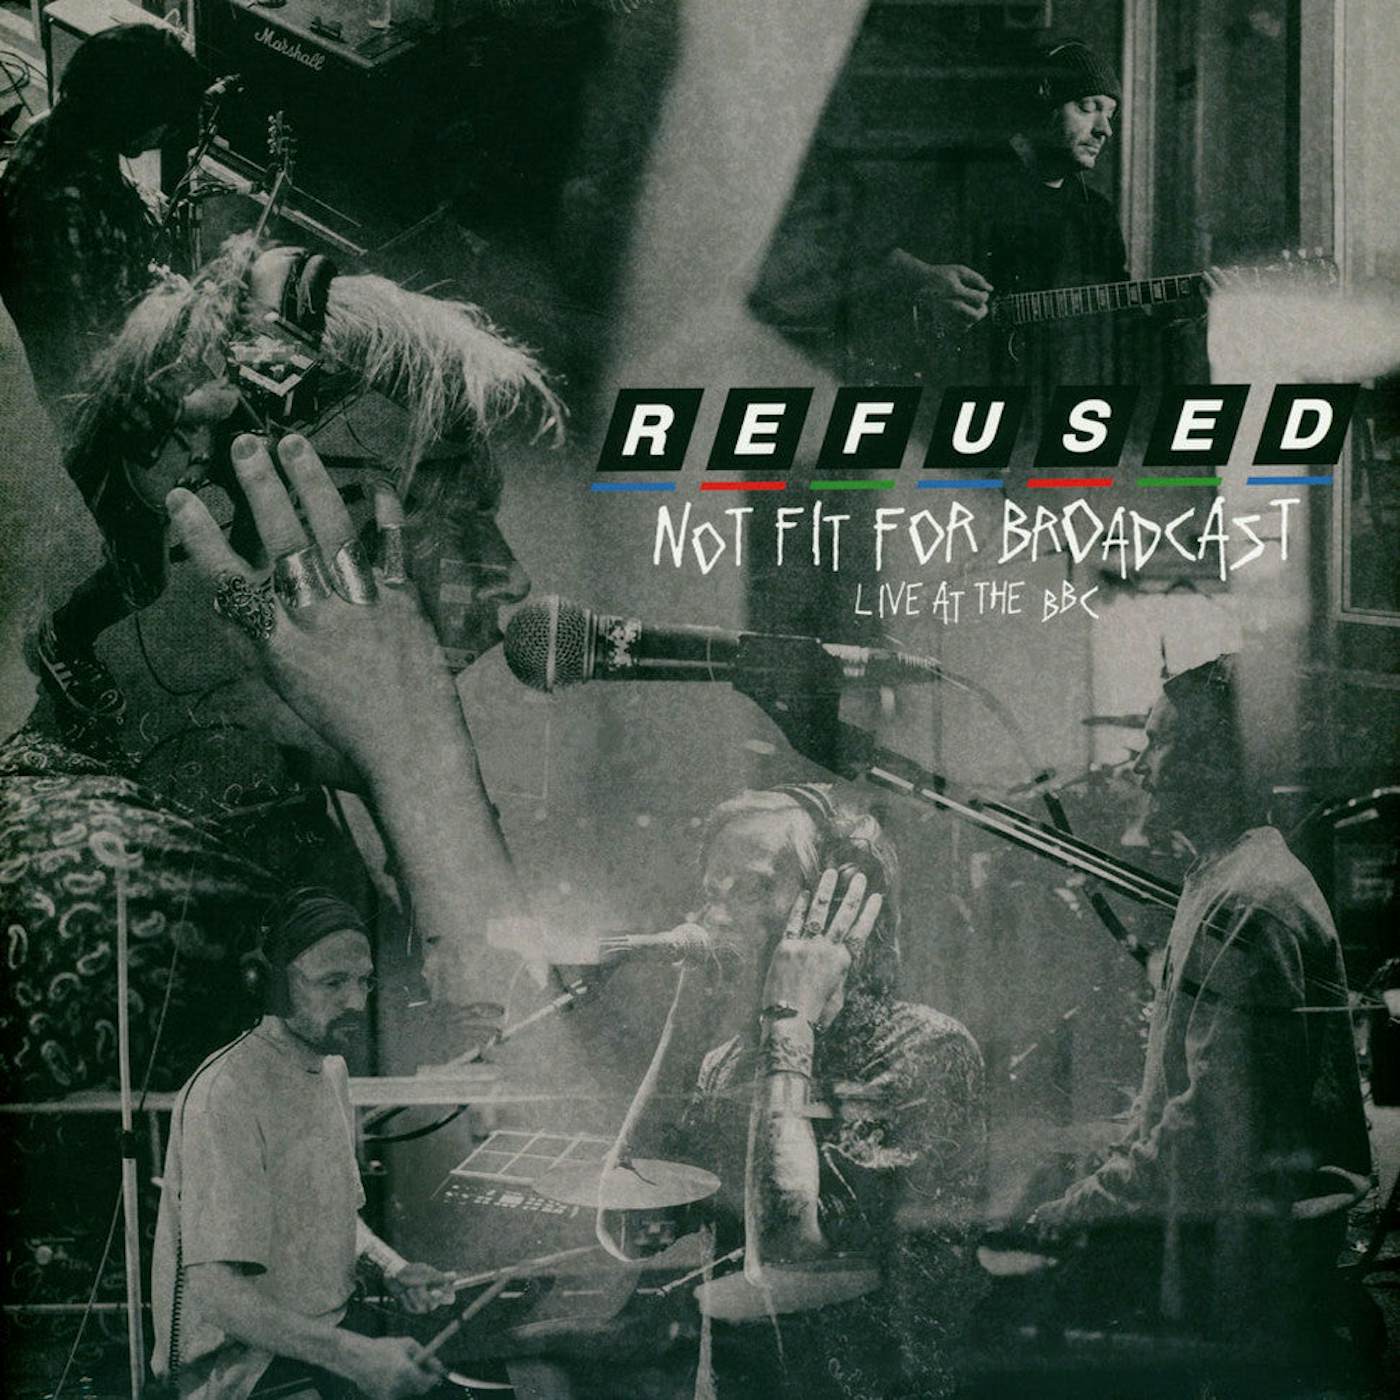 Refused - Not Fit For Broadcasting (Live At The BBC)